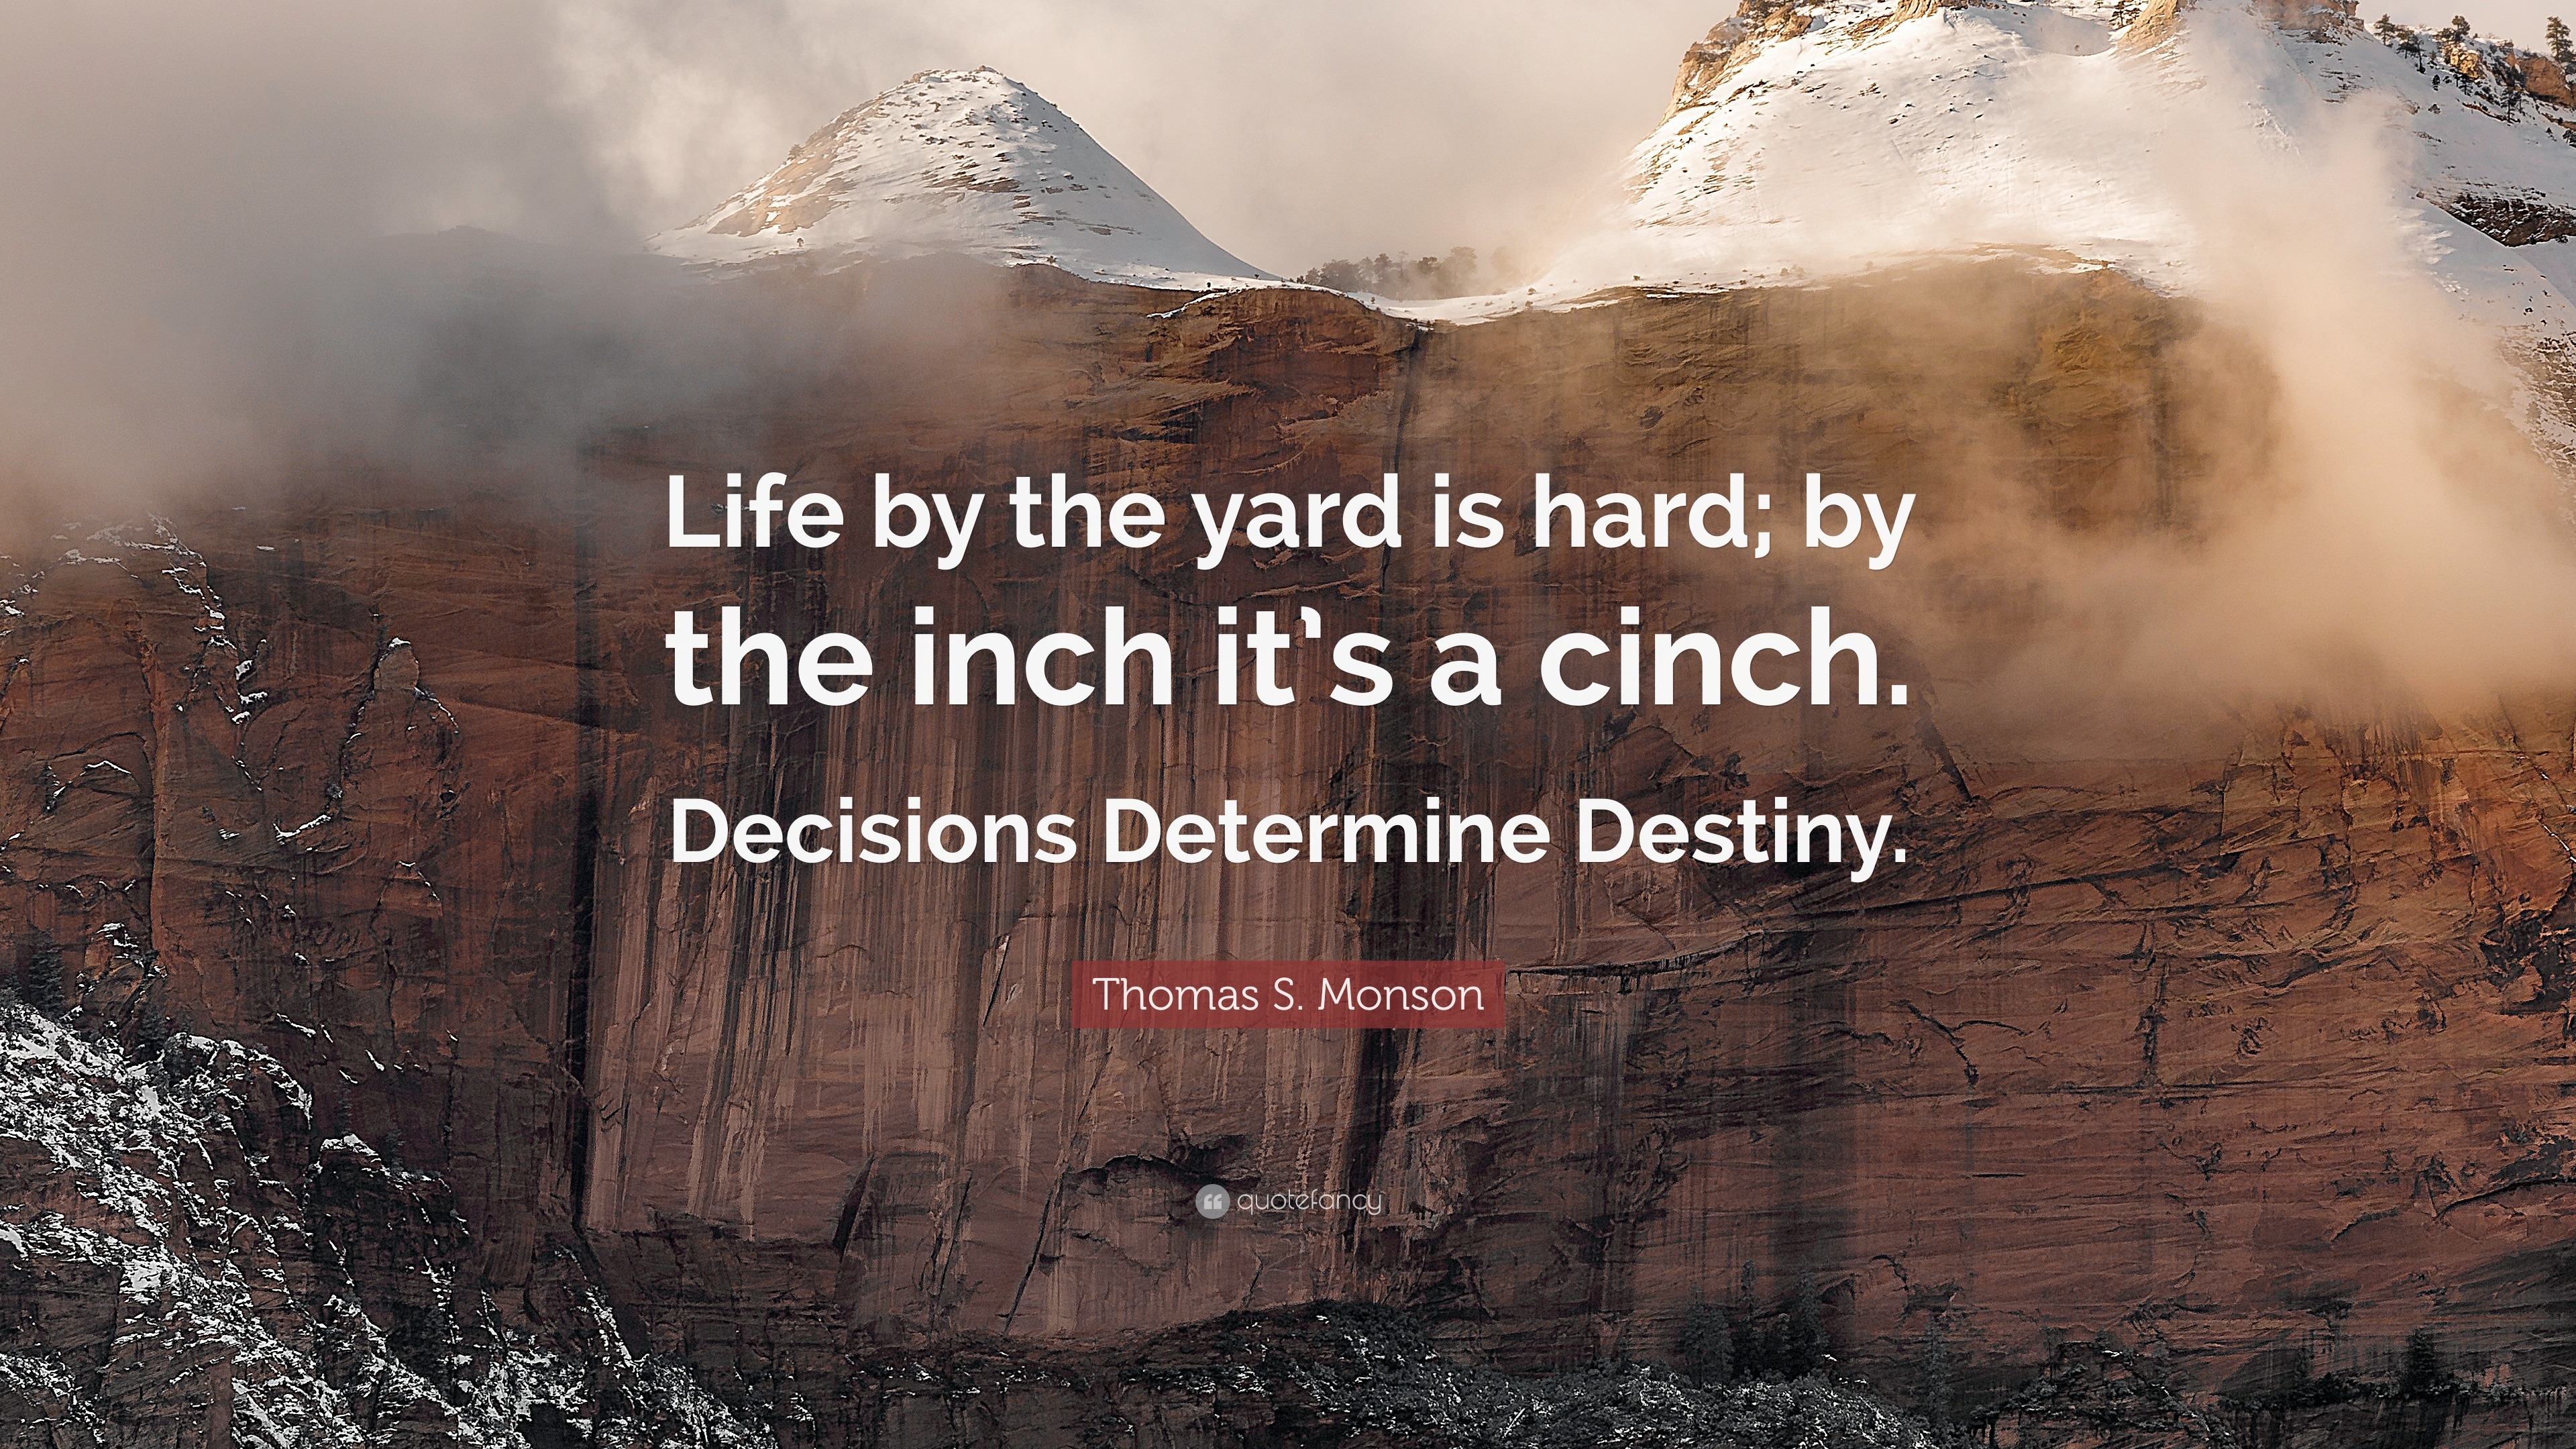 Thomas S Monson Quote “Life by the yard is hard by the